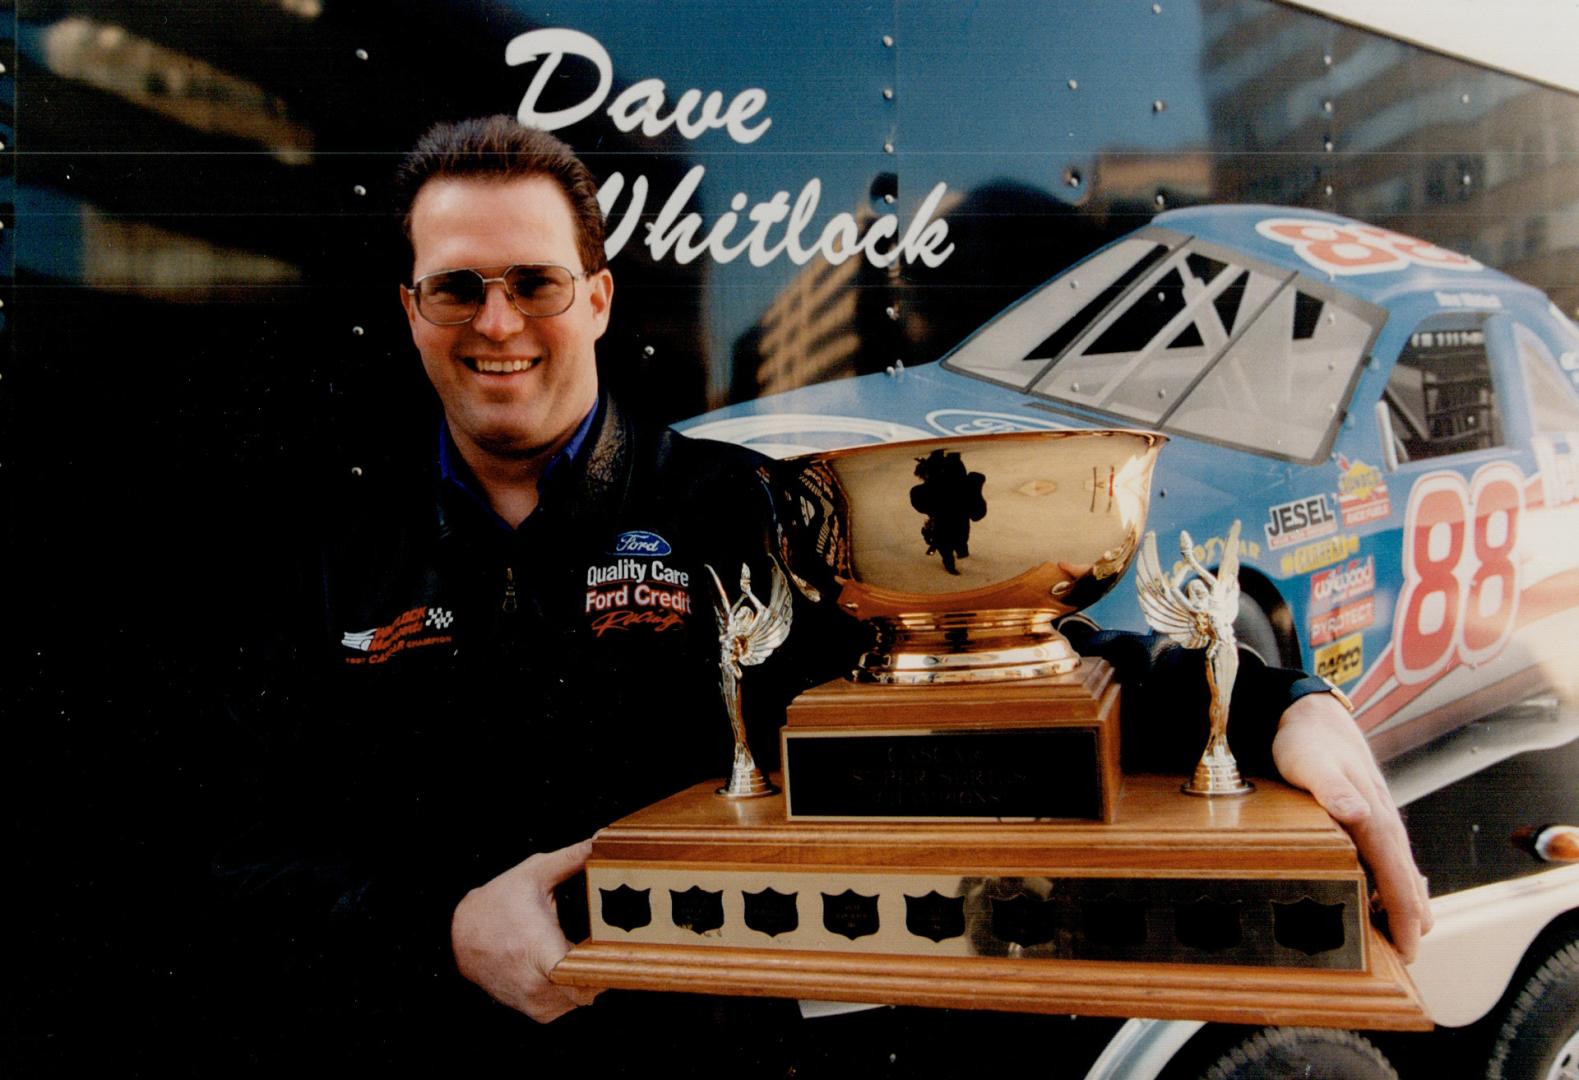 Auto racing - Cascar and Whitlock, Dave with Super series Trophy